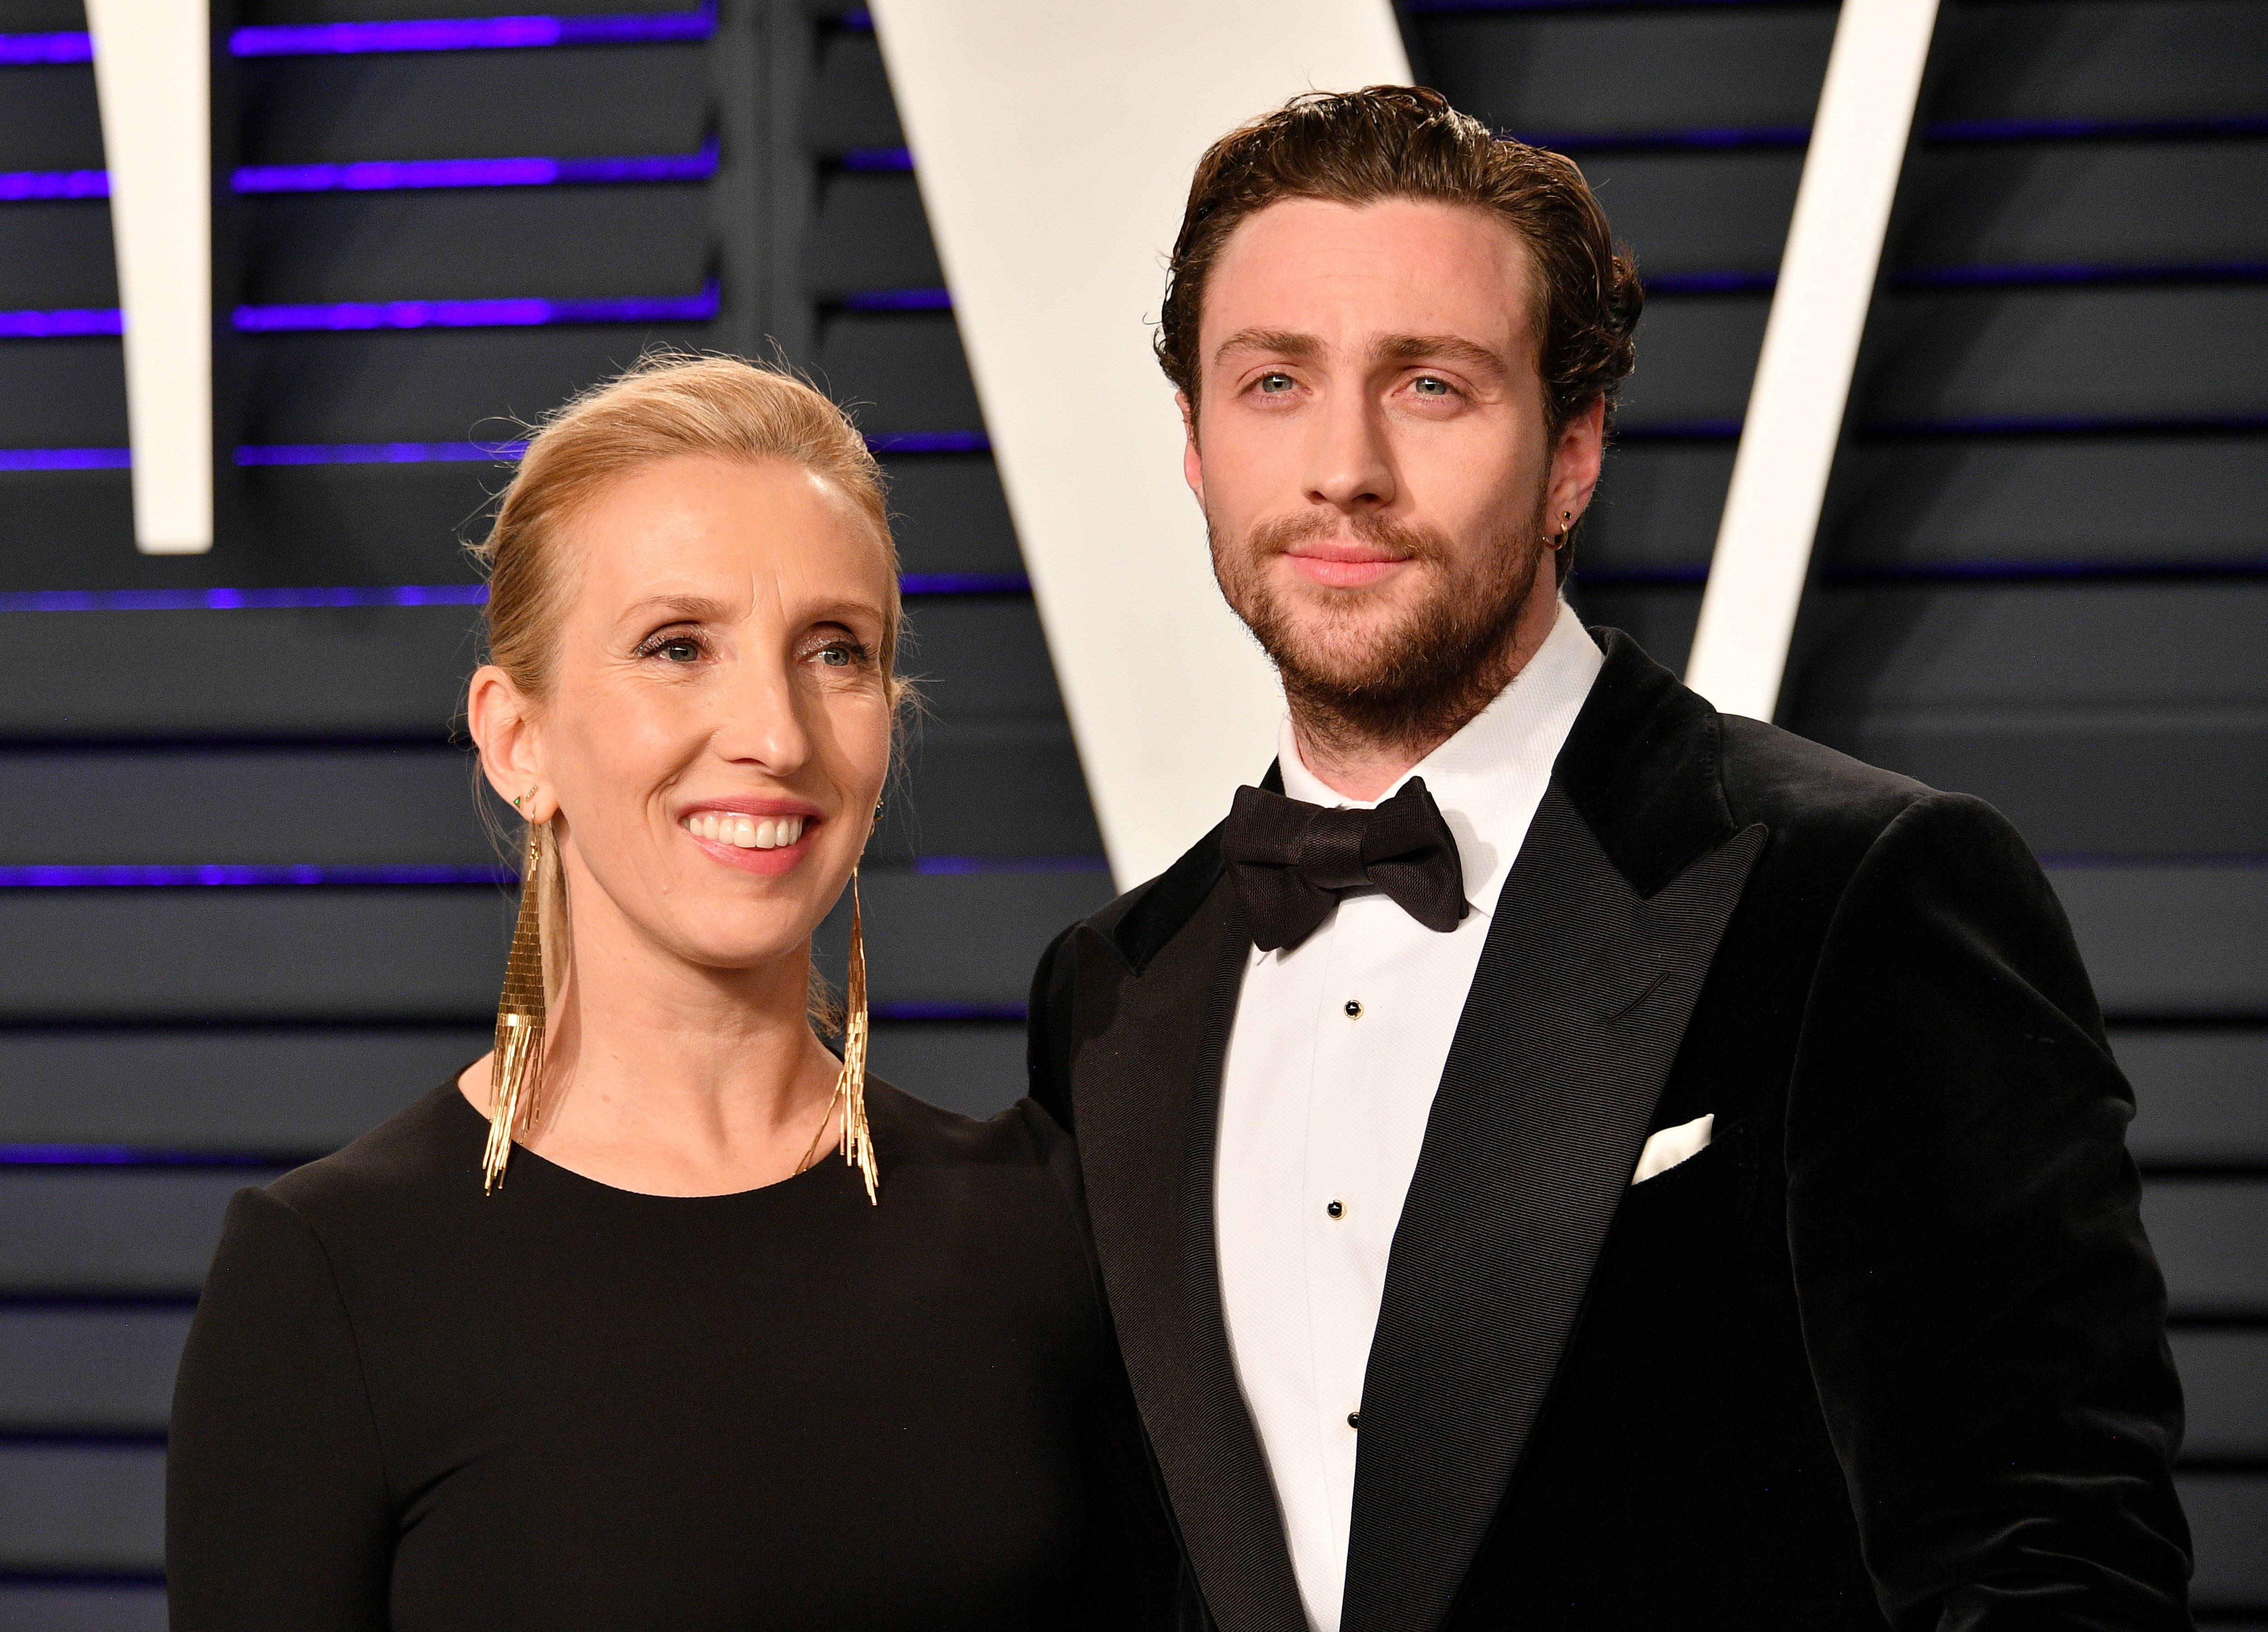 Sam Taylor-Johnson (L) and Aaron Taylor-Johnson attend the 2019 Vanity Fair Oscar Party hosted by Radhika Jones at Wallis Annenberg Center for the Performing Arts on February 24, 2019 in Beverly Hills, California. | Source: Getty Images